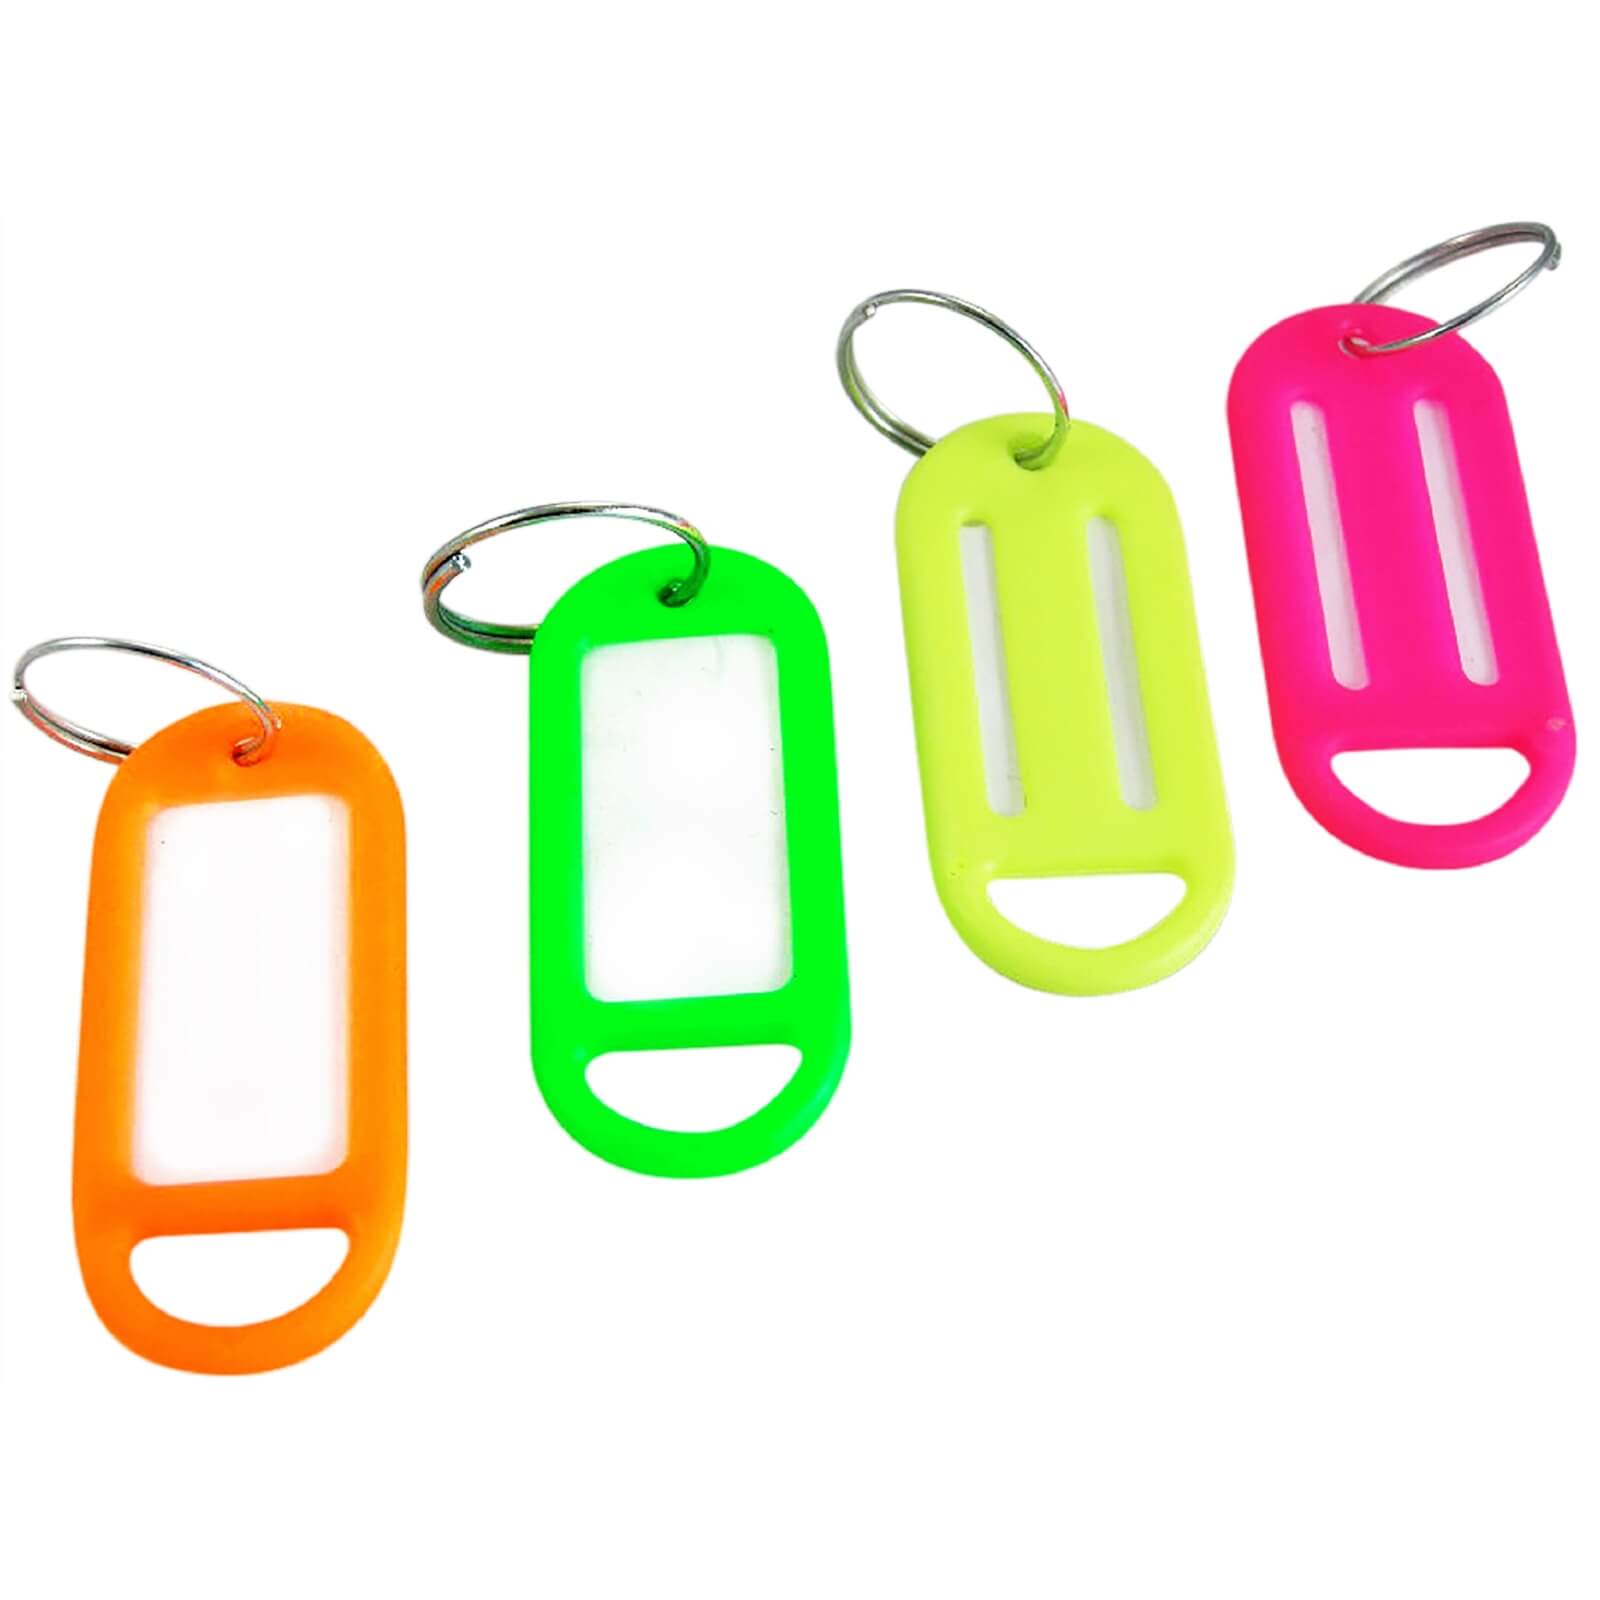 Photo of Key Rings With Id Tags - 4 Pack - Fluorescent Colours